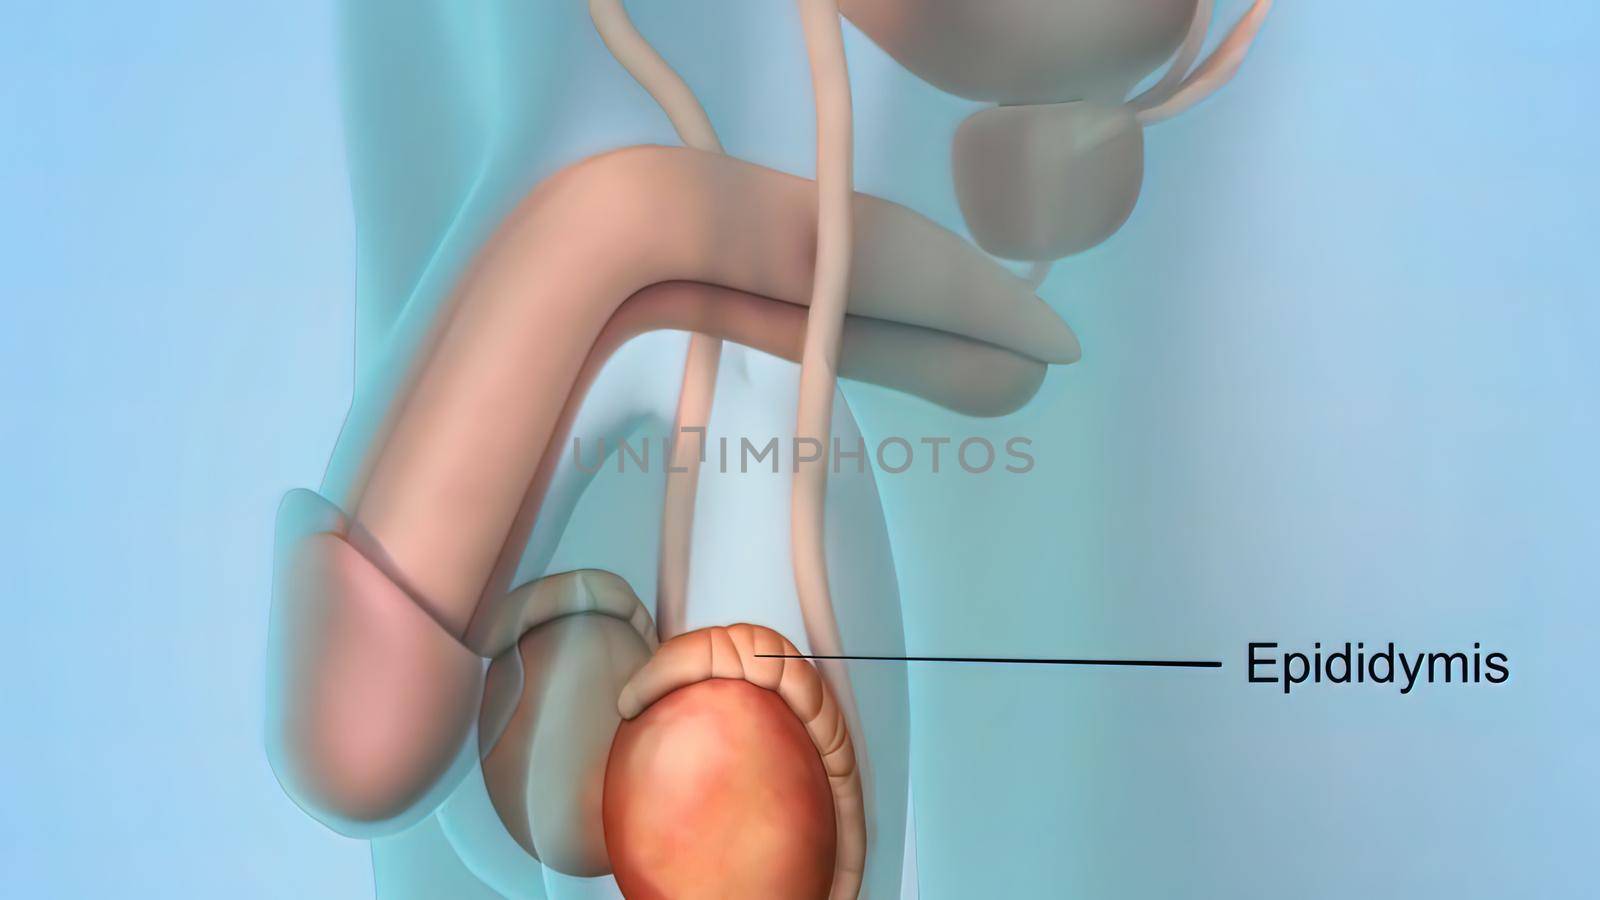 Epididymis, a highly convoluted duct behind the testis, along which sperm passes to the vas deferens. 3D illustration